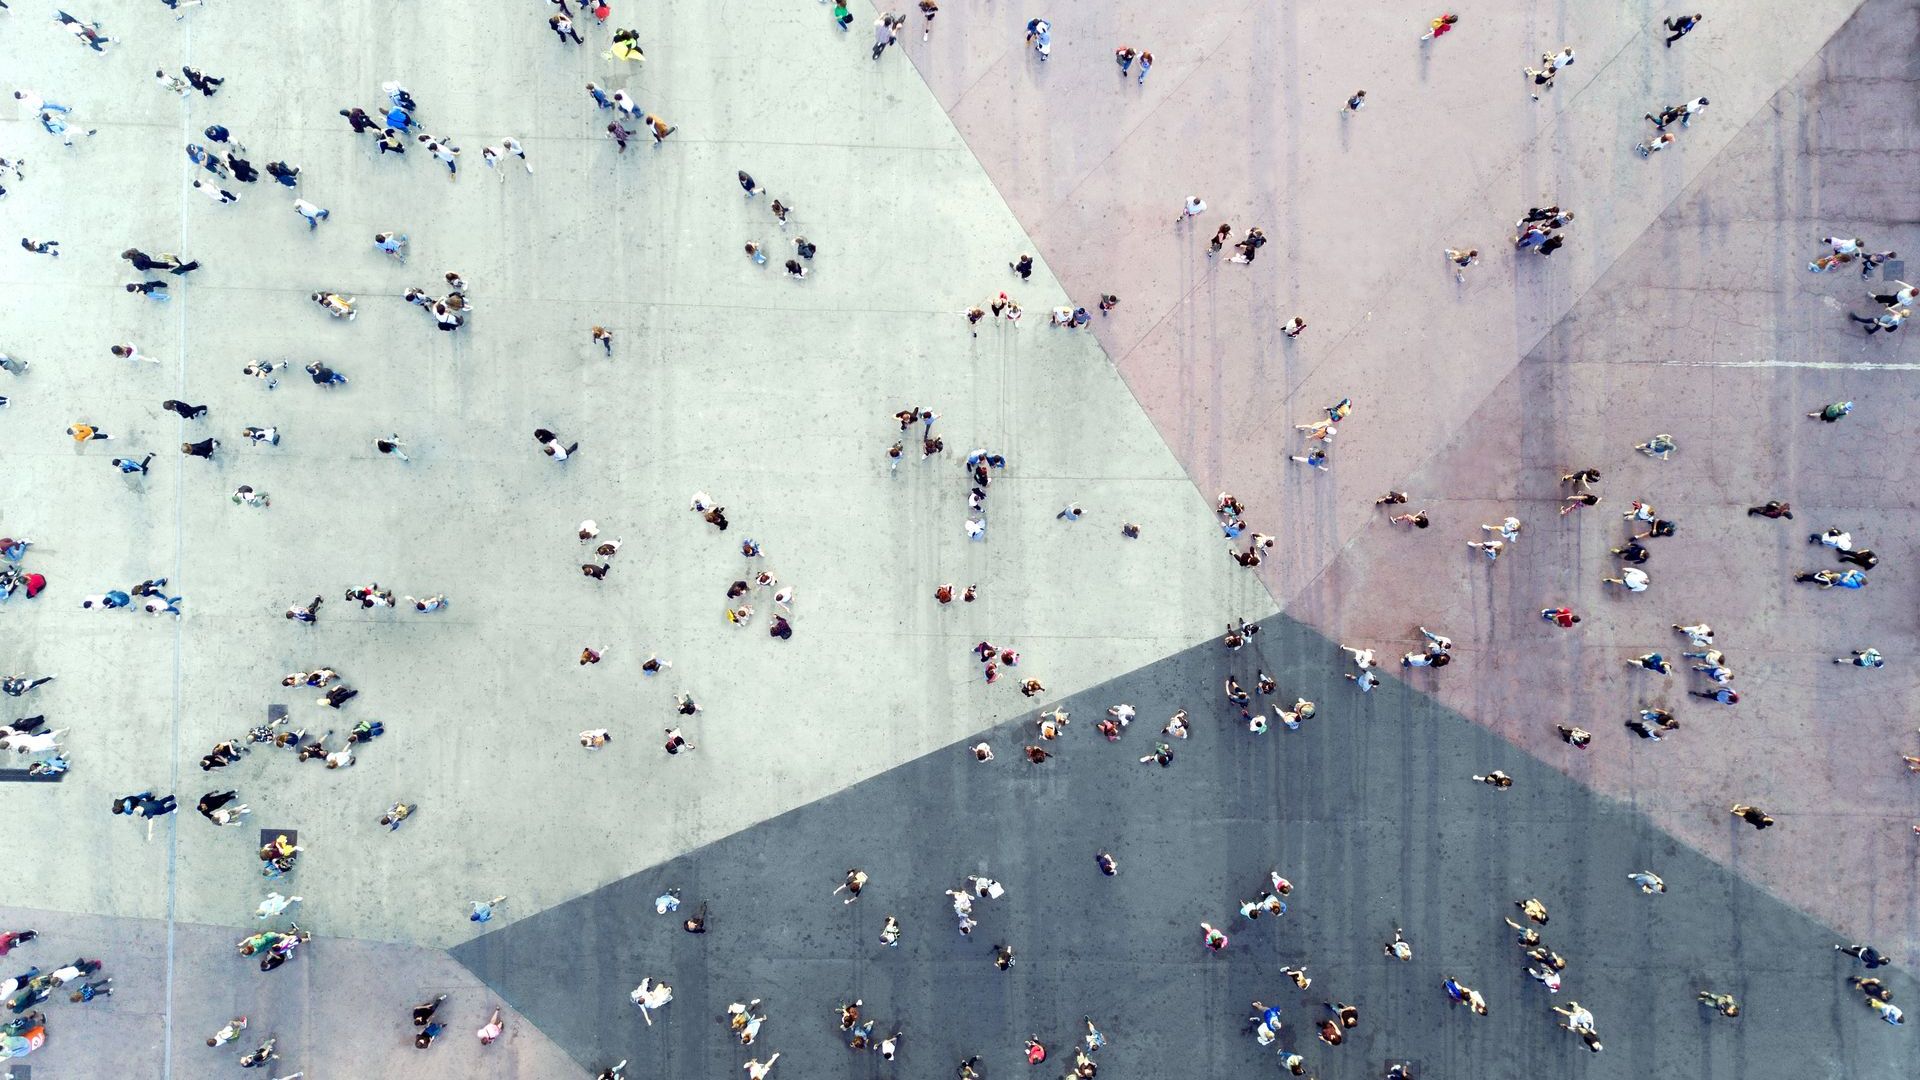 bird's eye view of people walking on top of a tri-colored large walkway